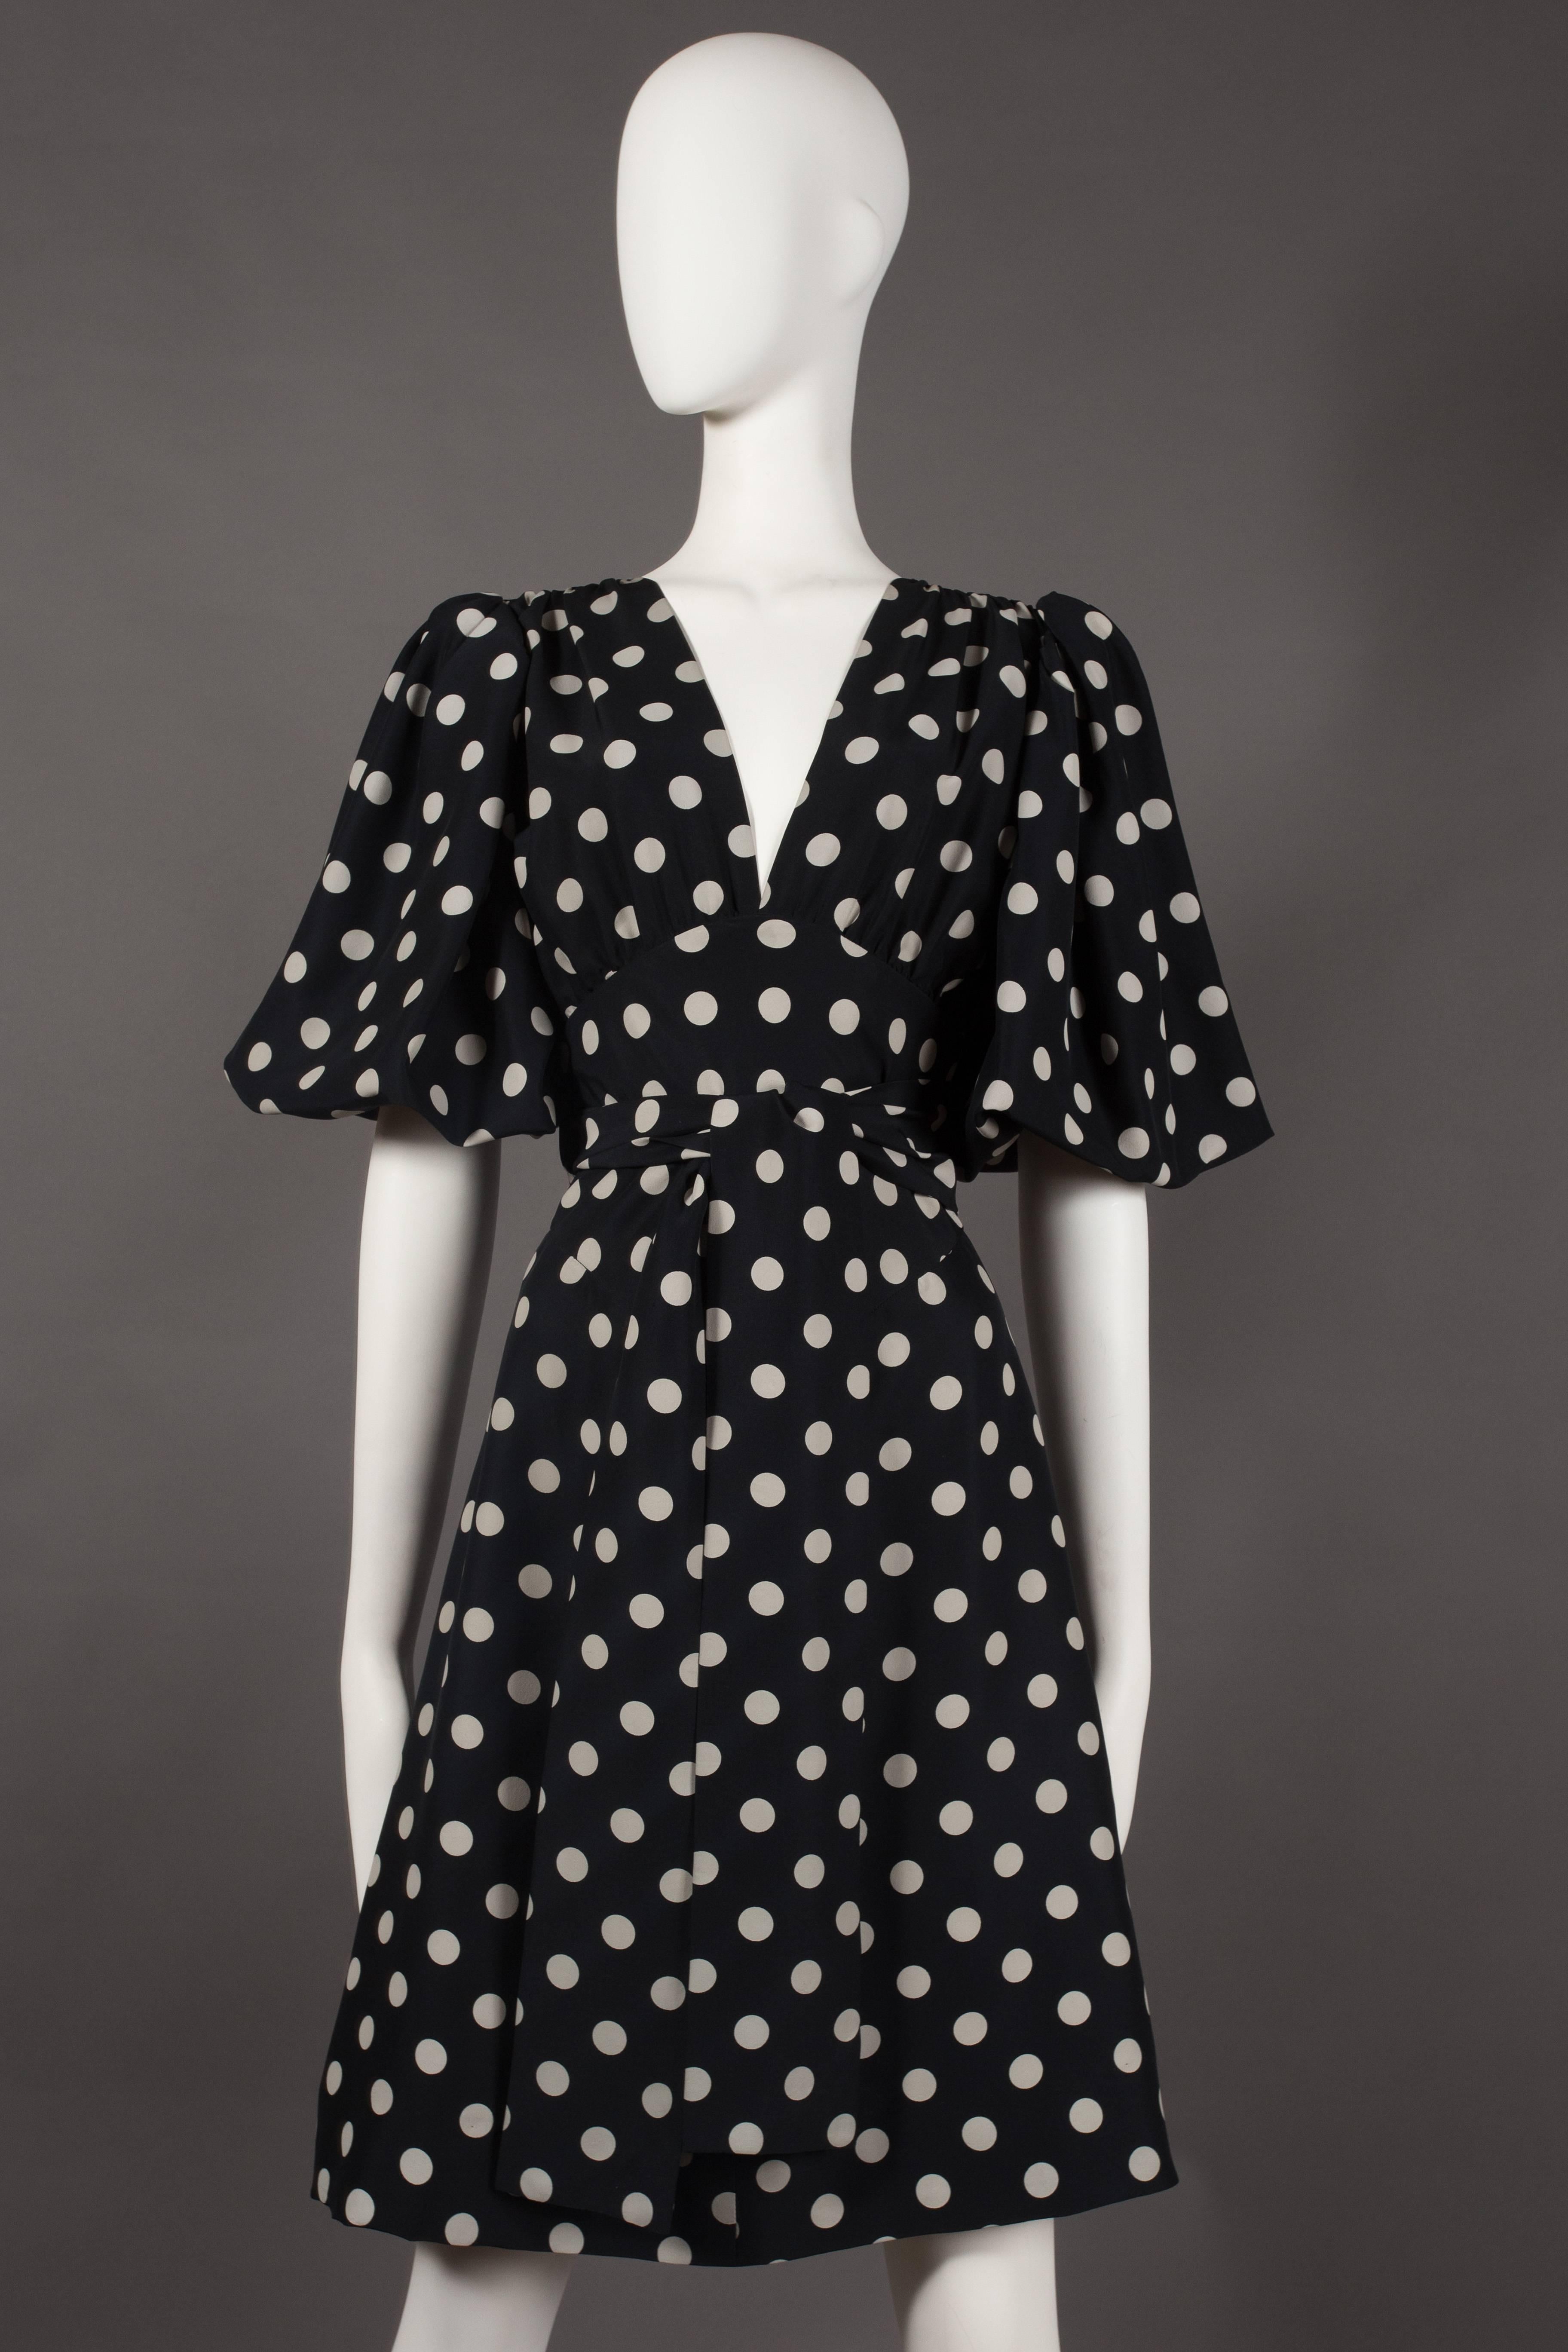 A Yves Saint Laurent polka dot silk wrap dress, circa 1970s. The dress features a low v-neck, pleated puff sleeves, wrap belt closure on waist and button closures at the rear of the dress.